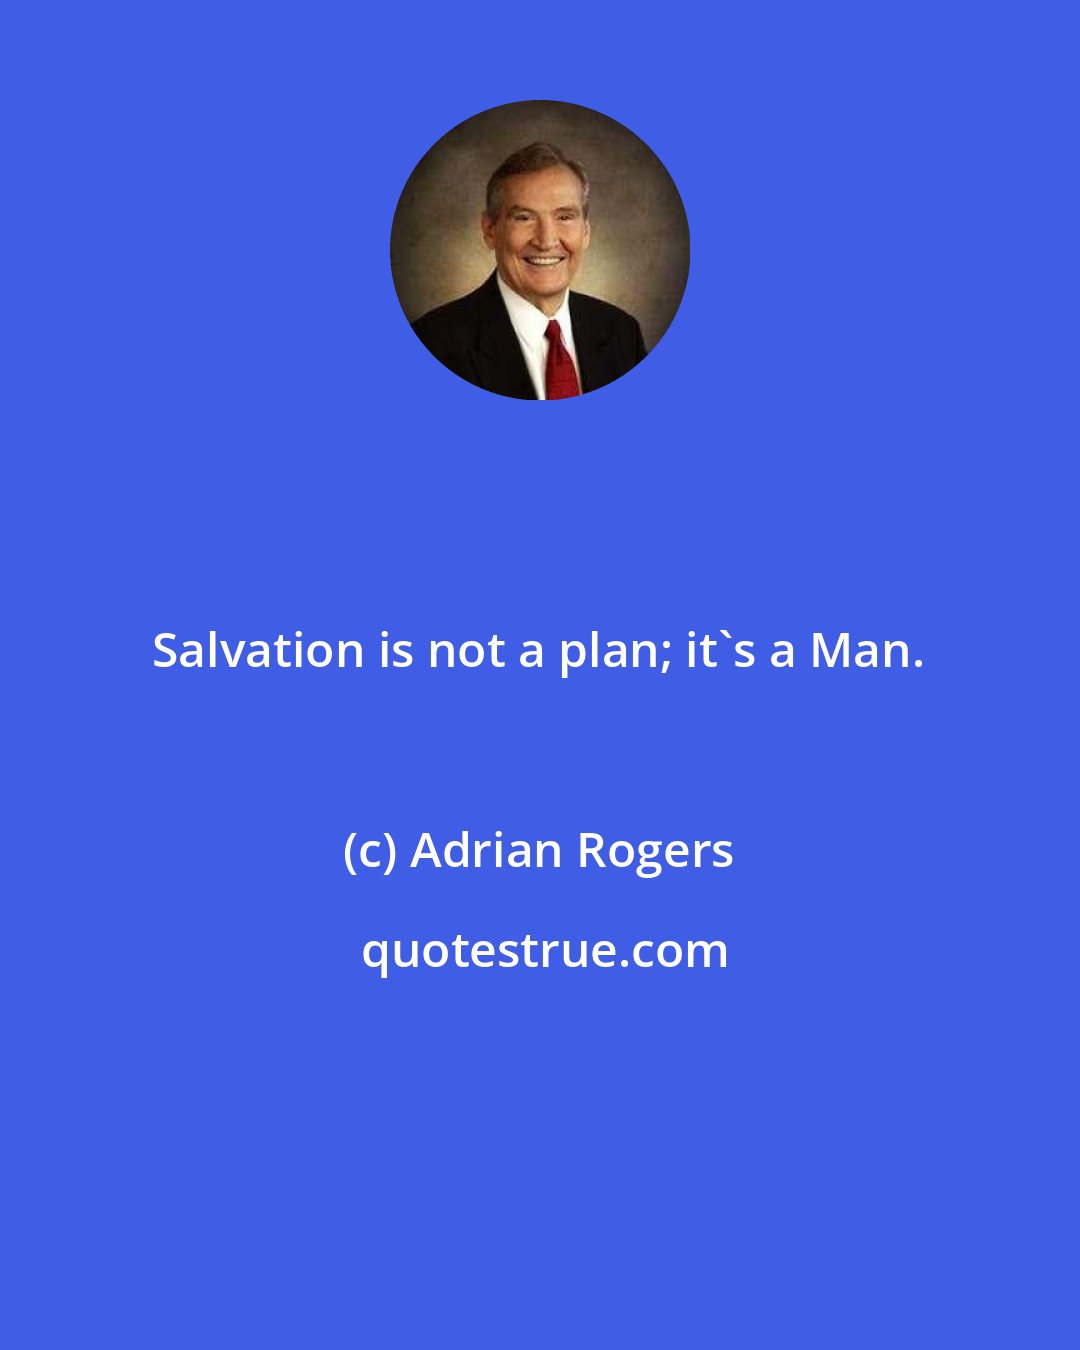 Adrian Rogers: Salvation is not a plan; it's a Man.